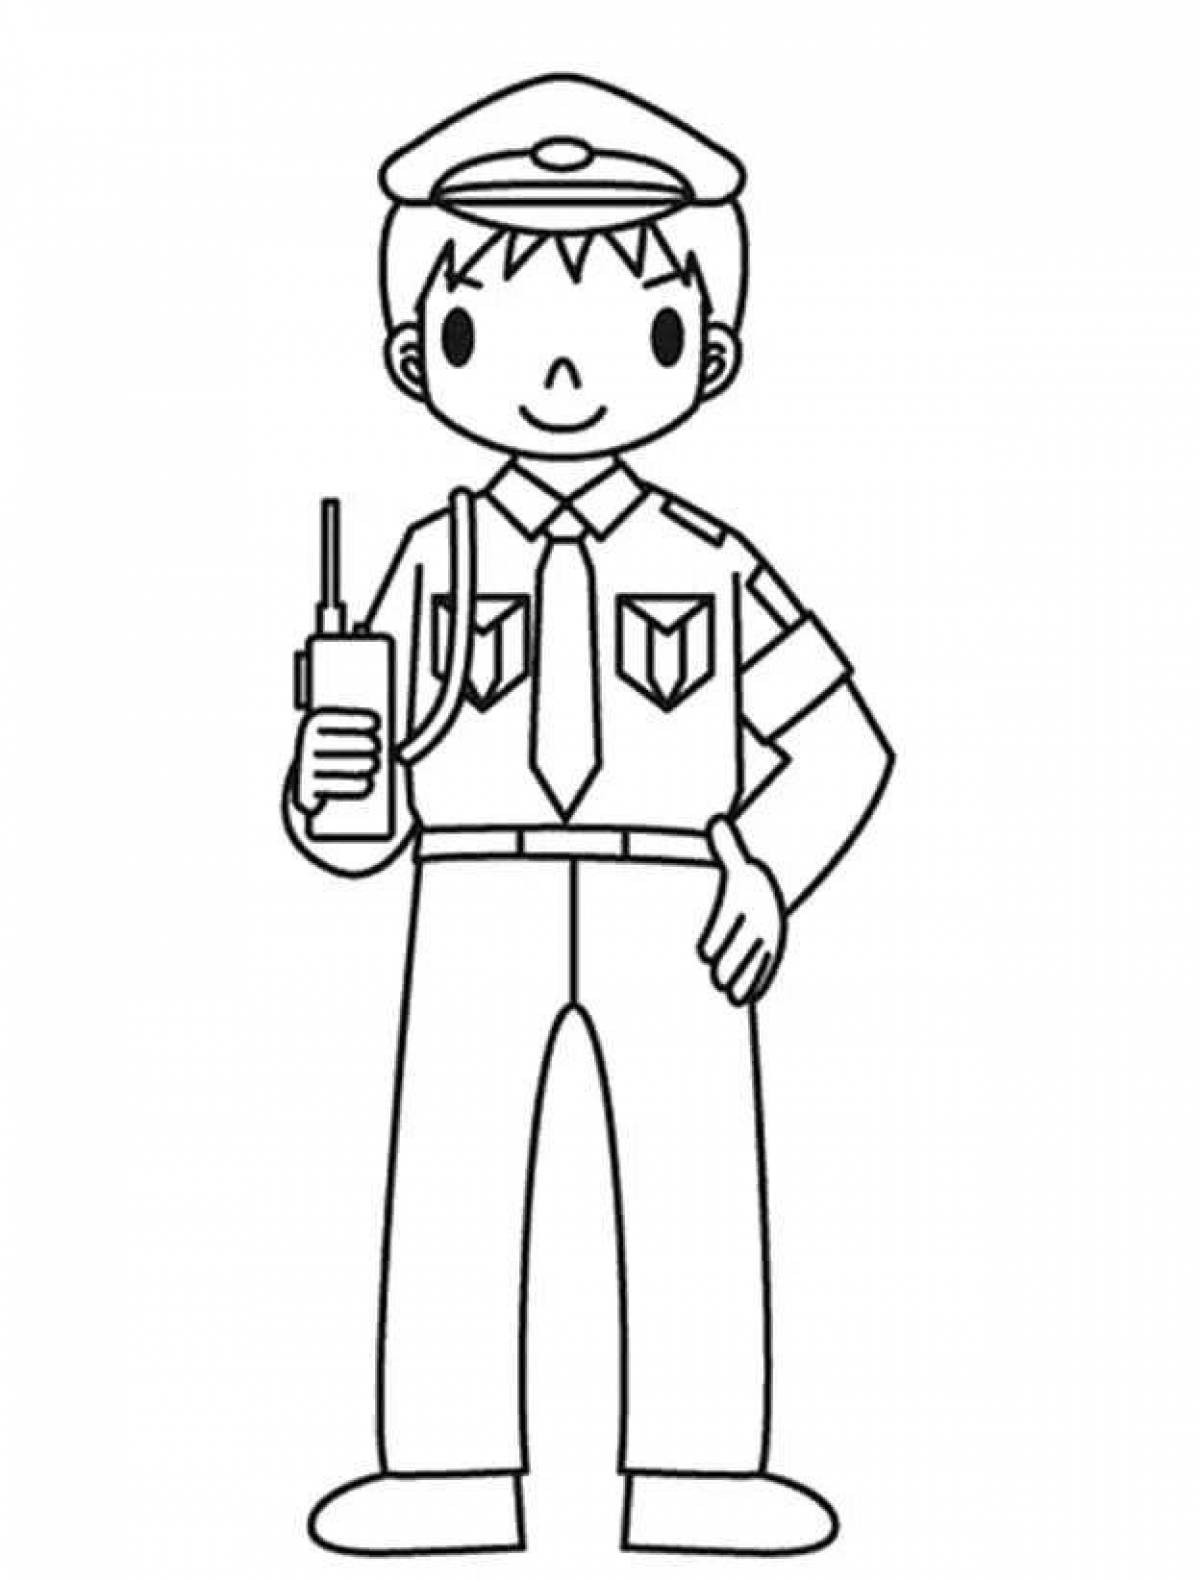 Colorful job coloring pages for job seekers